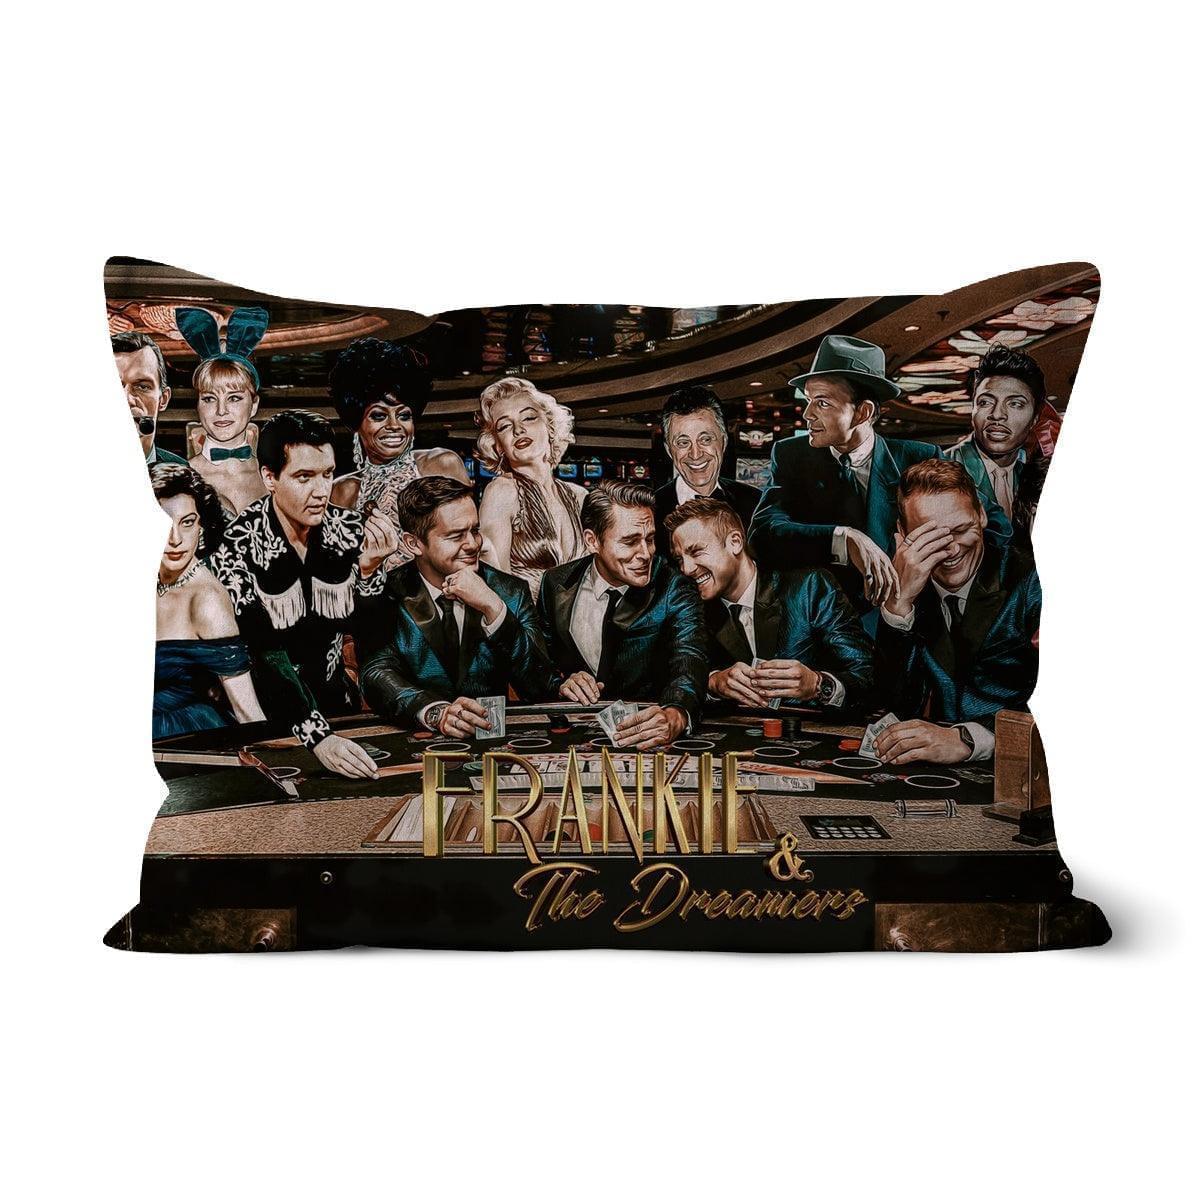 Frankie And The Dreamers Casino 2 Cushion | Homeware Canvas 19"x13"